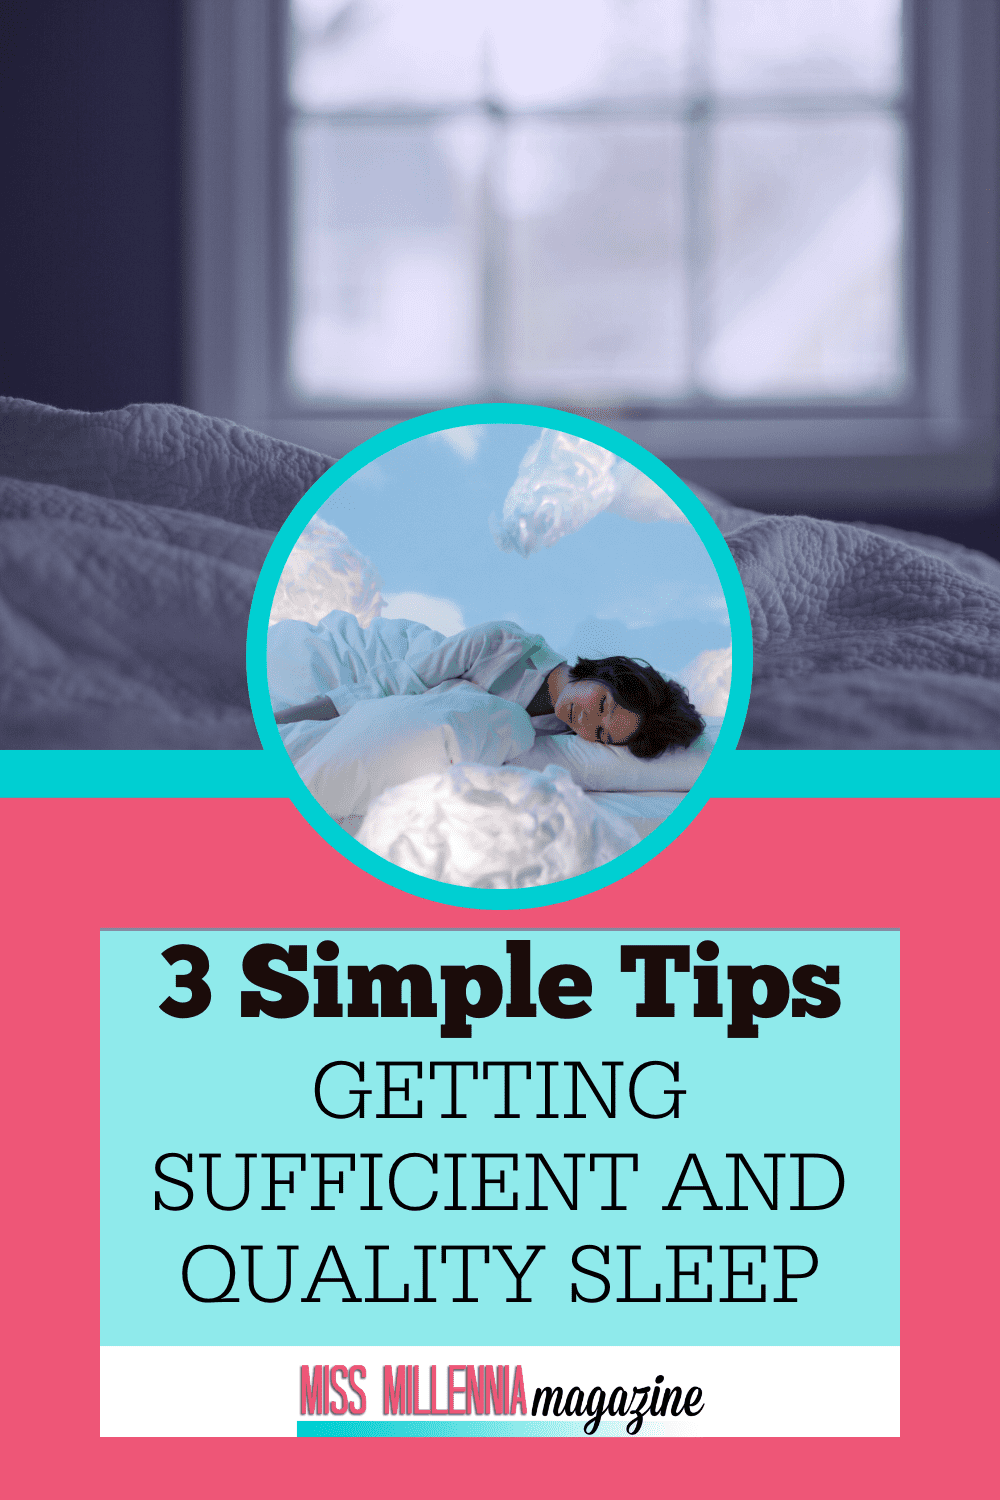 3 Simple Tips to Getting Sufficient and Quality Sleep